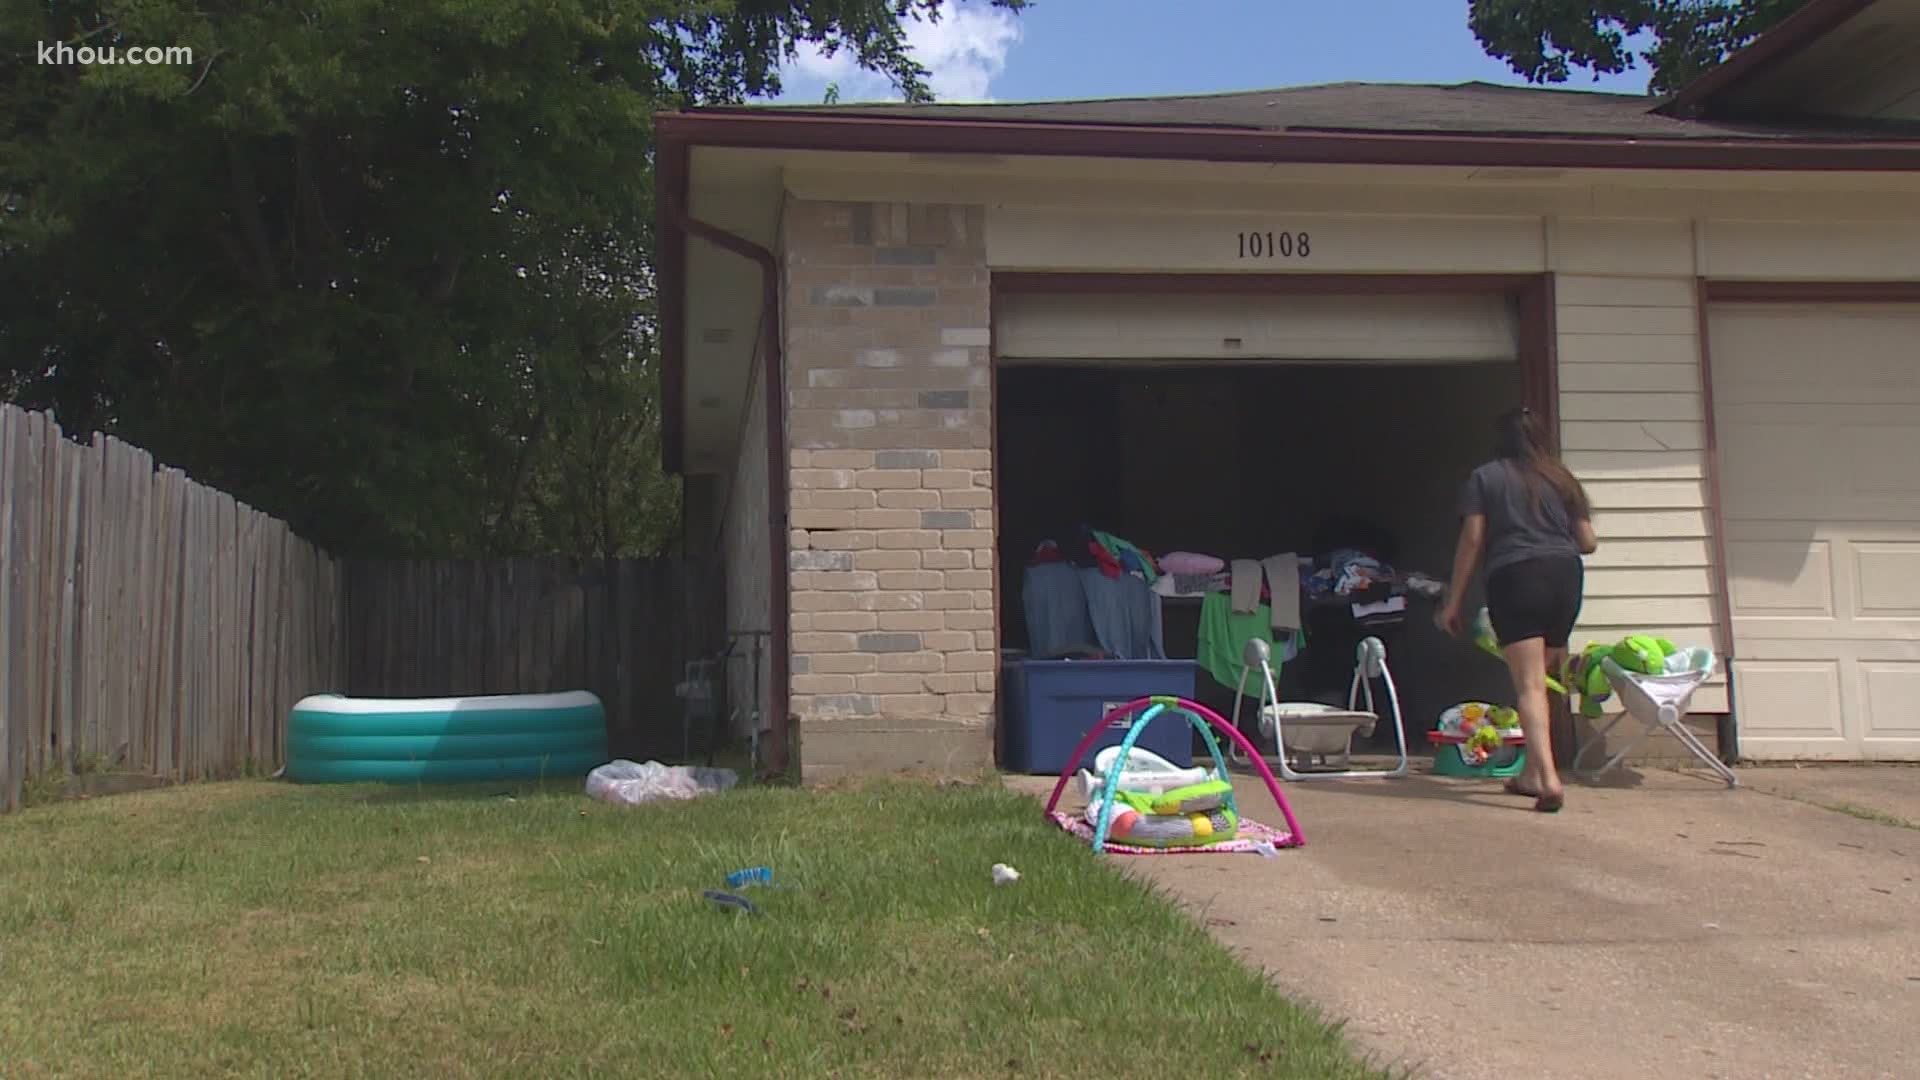 Nina San Miguel is among an unknown number of people who don't qualify for Houston's Rental Assistance Program. She's now scrambling to make September rent.